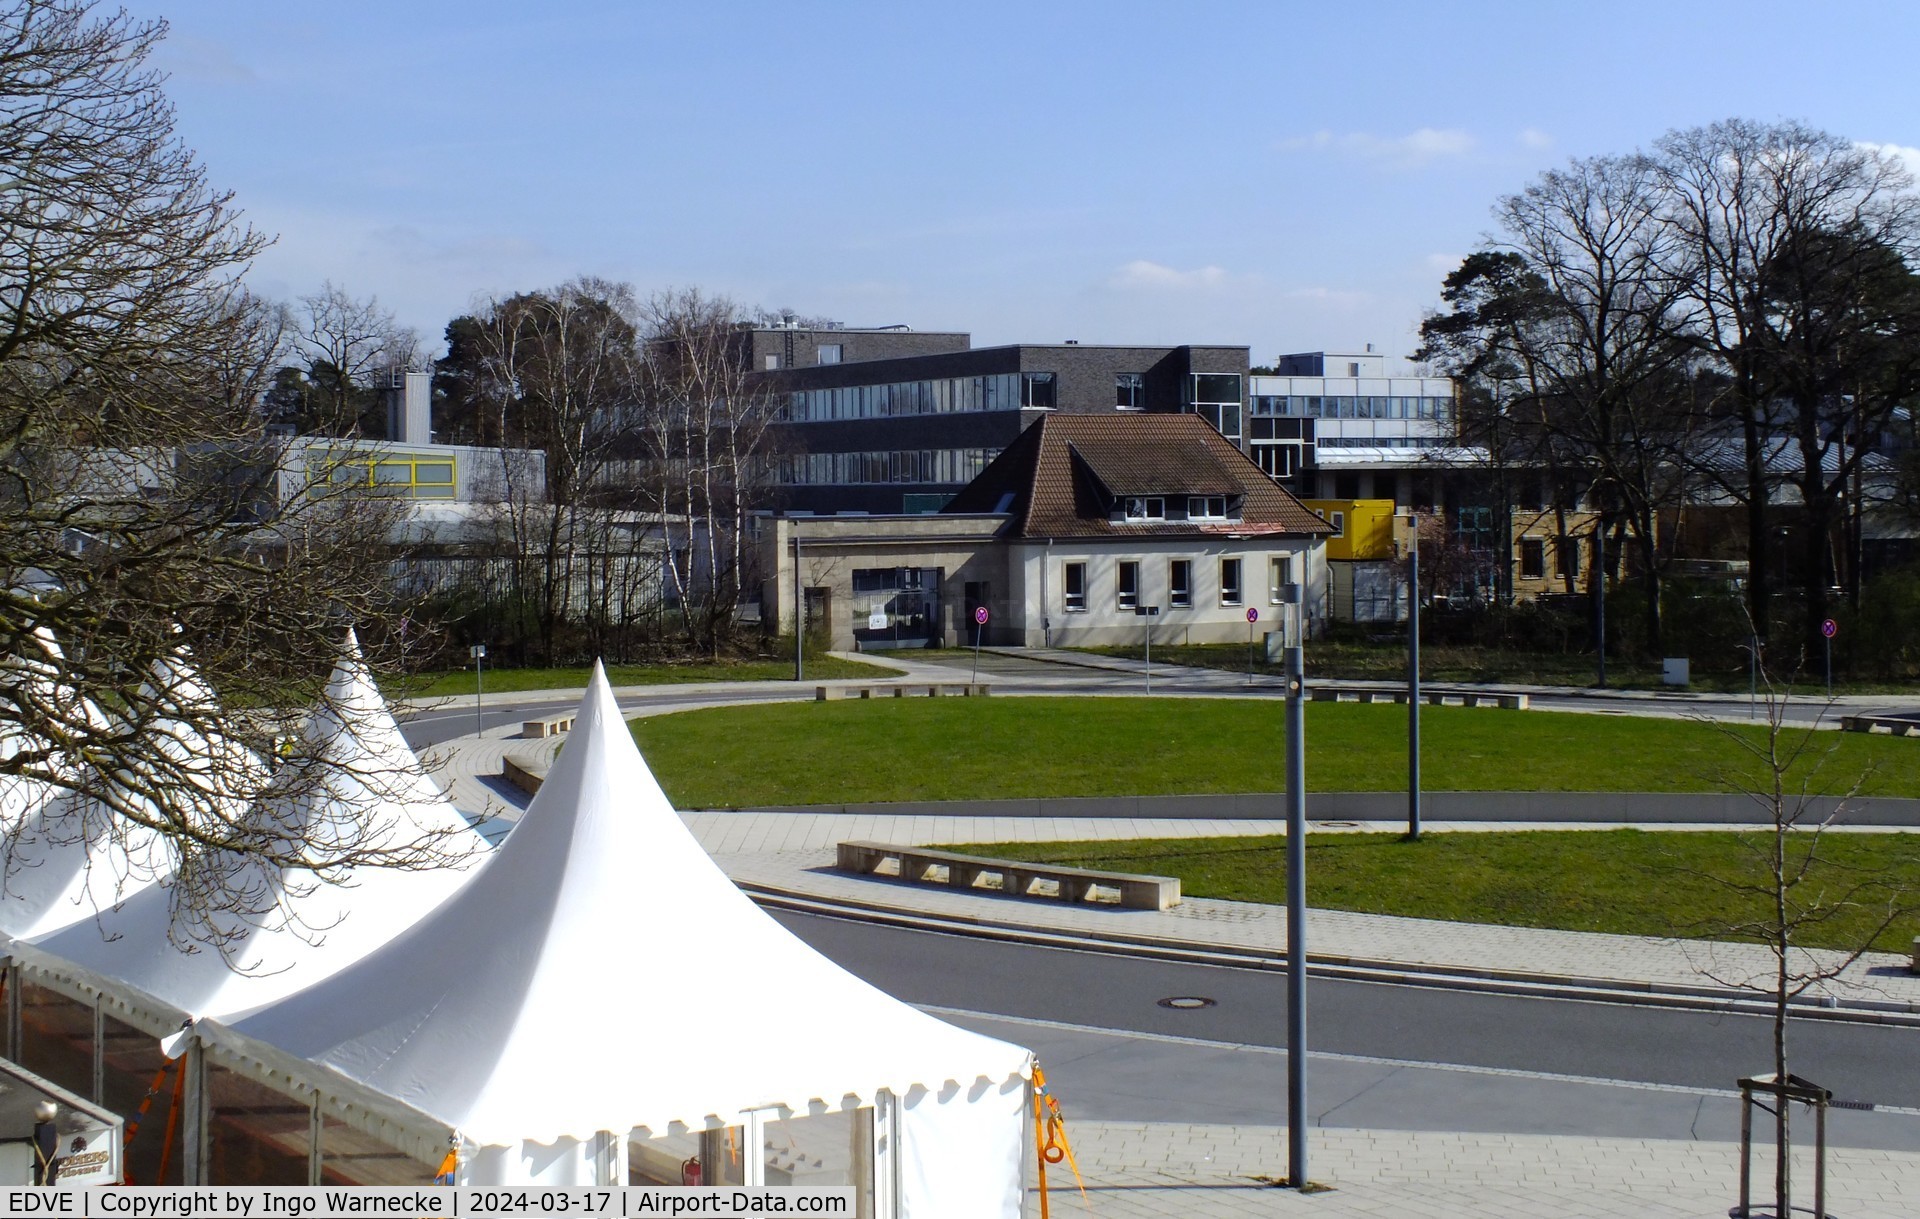 Braunschweig-Wolfsburg Regional Airport, Braunschweig, Lower Saxony Germany (EDVE) - view from the visitors terrace with temporary pre-boarding tents towards the DLR at Braunschweig/Wolfsburg airport, BS/Waggum